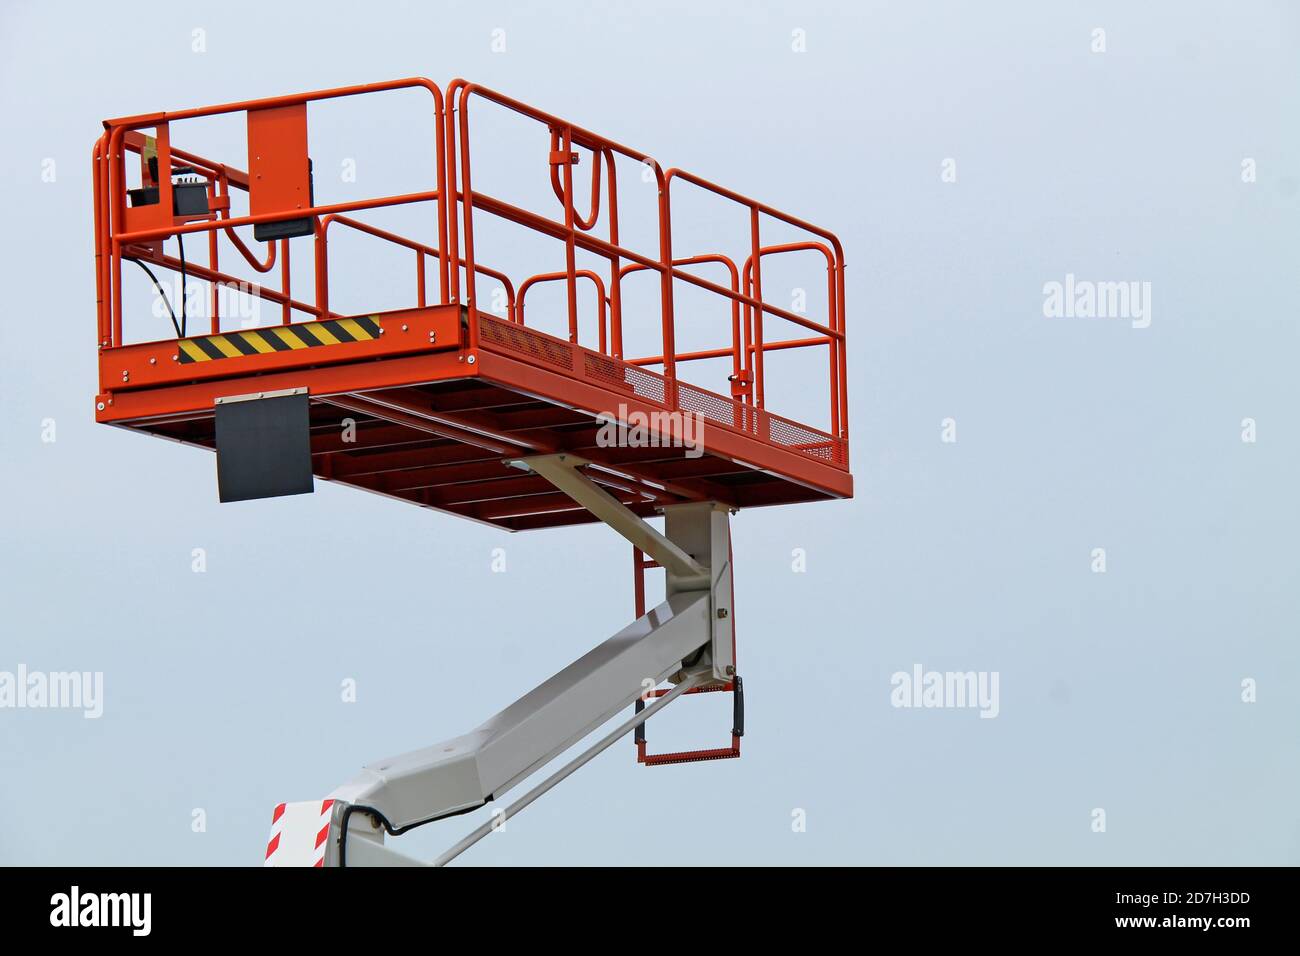 A Work Platform Cage on a Hydraulic Lifting Arm. Stock Photo